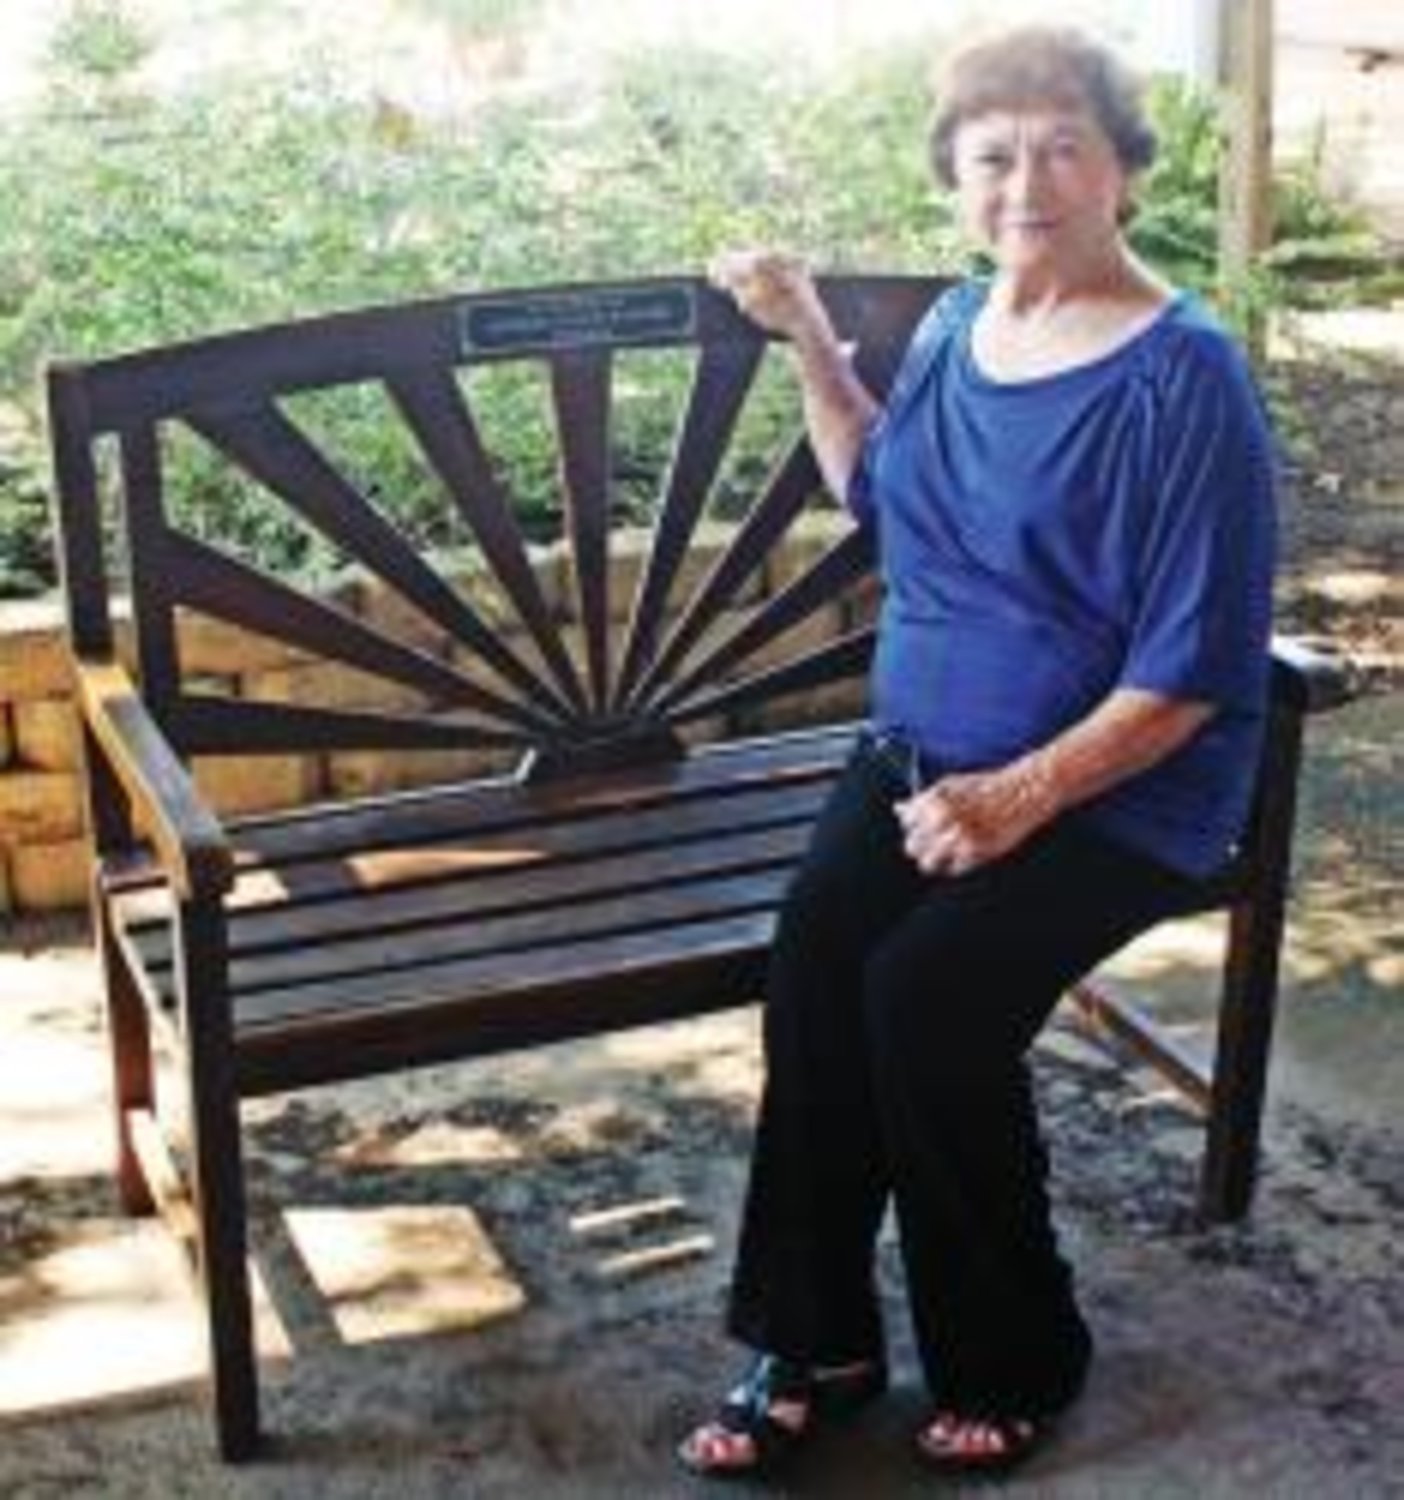 Mary Ballard, wife of the late Delbert Ballard and former Quitman ISD coach and teacher, sits on the bench dedicated to her husband's legacy.